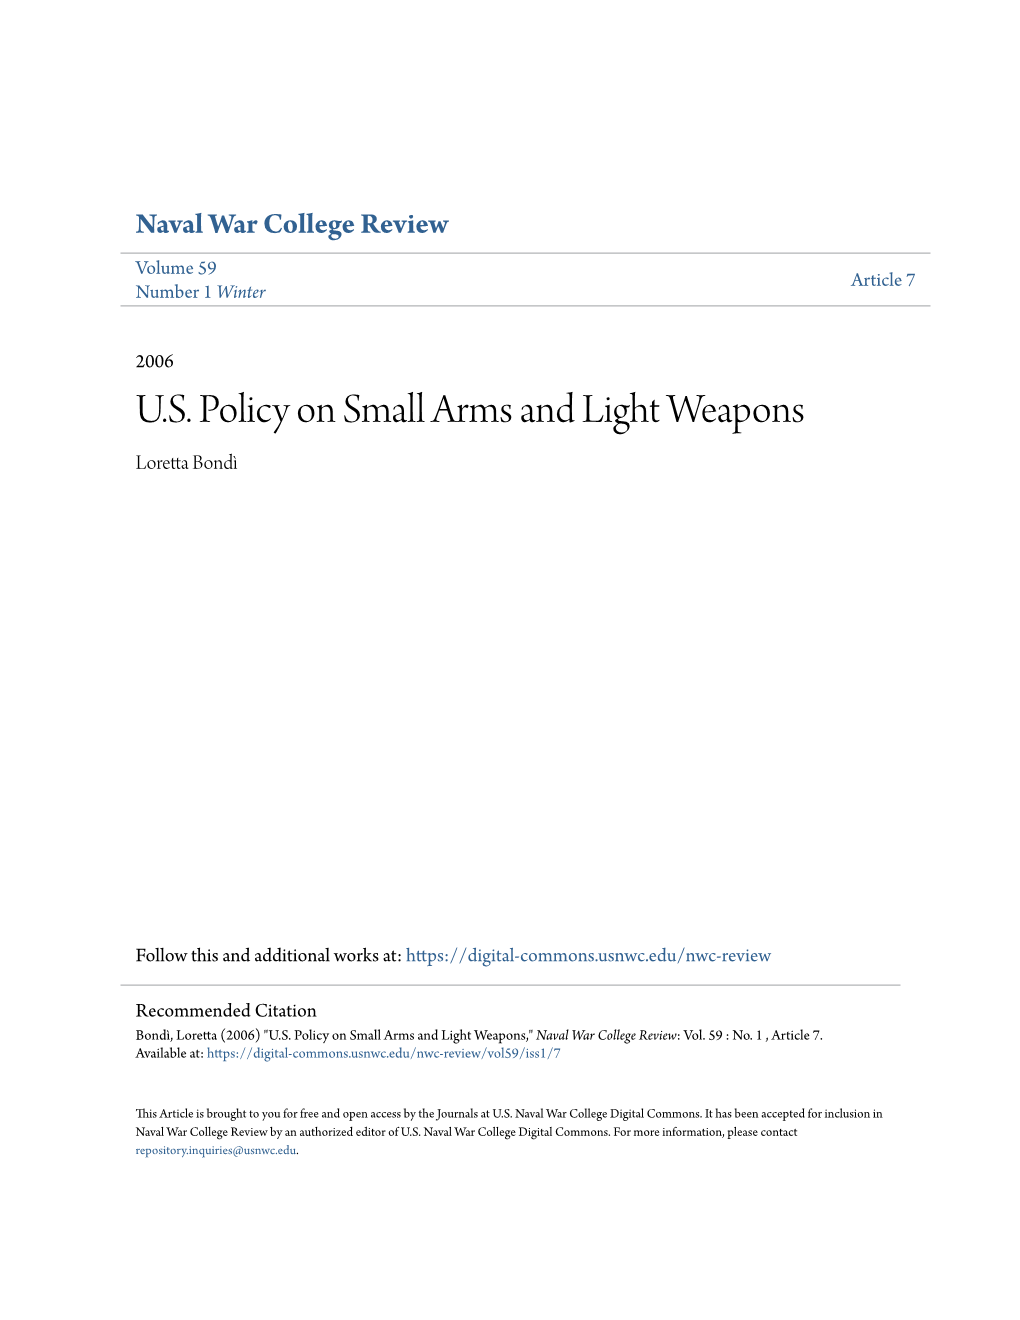 U.S. Policy on Small Arms and Light Weapons Loretta Bondì